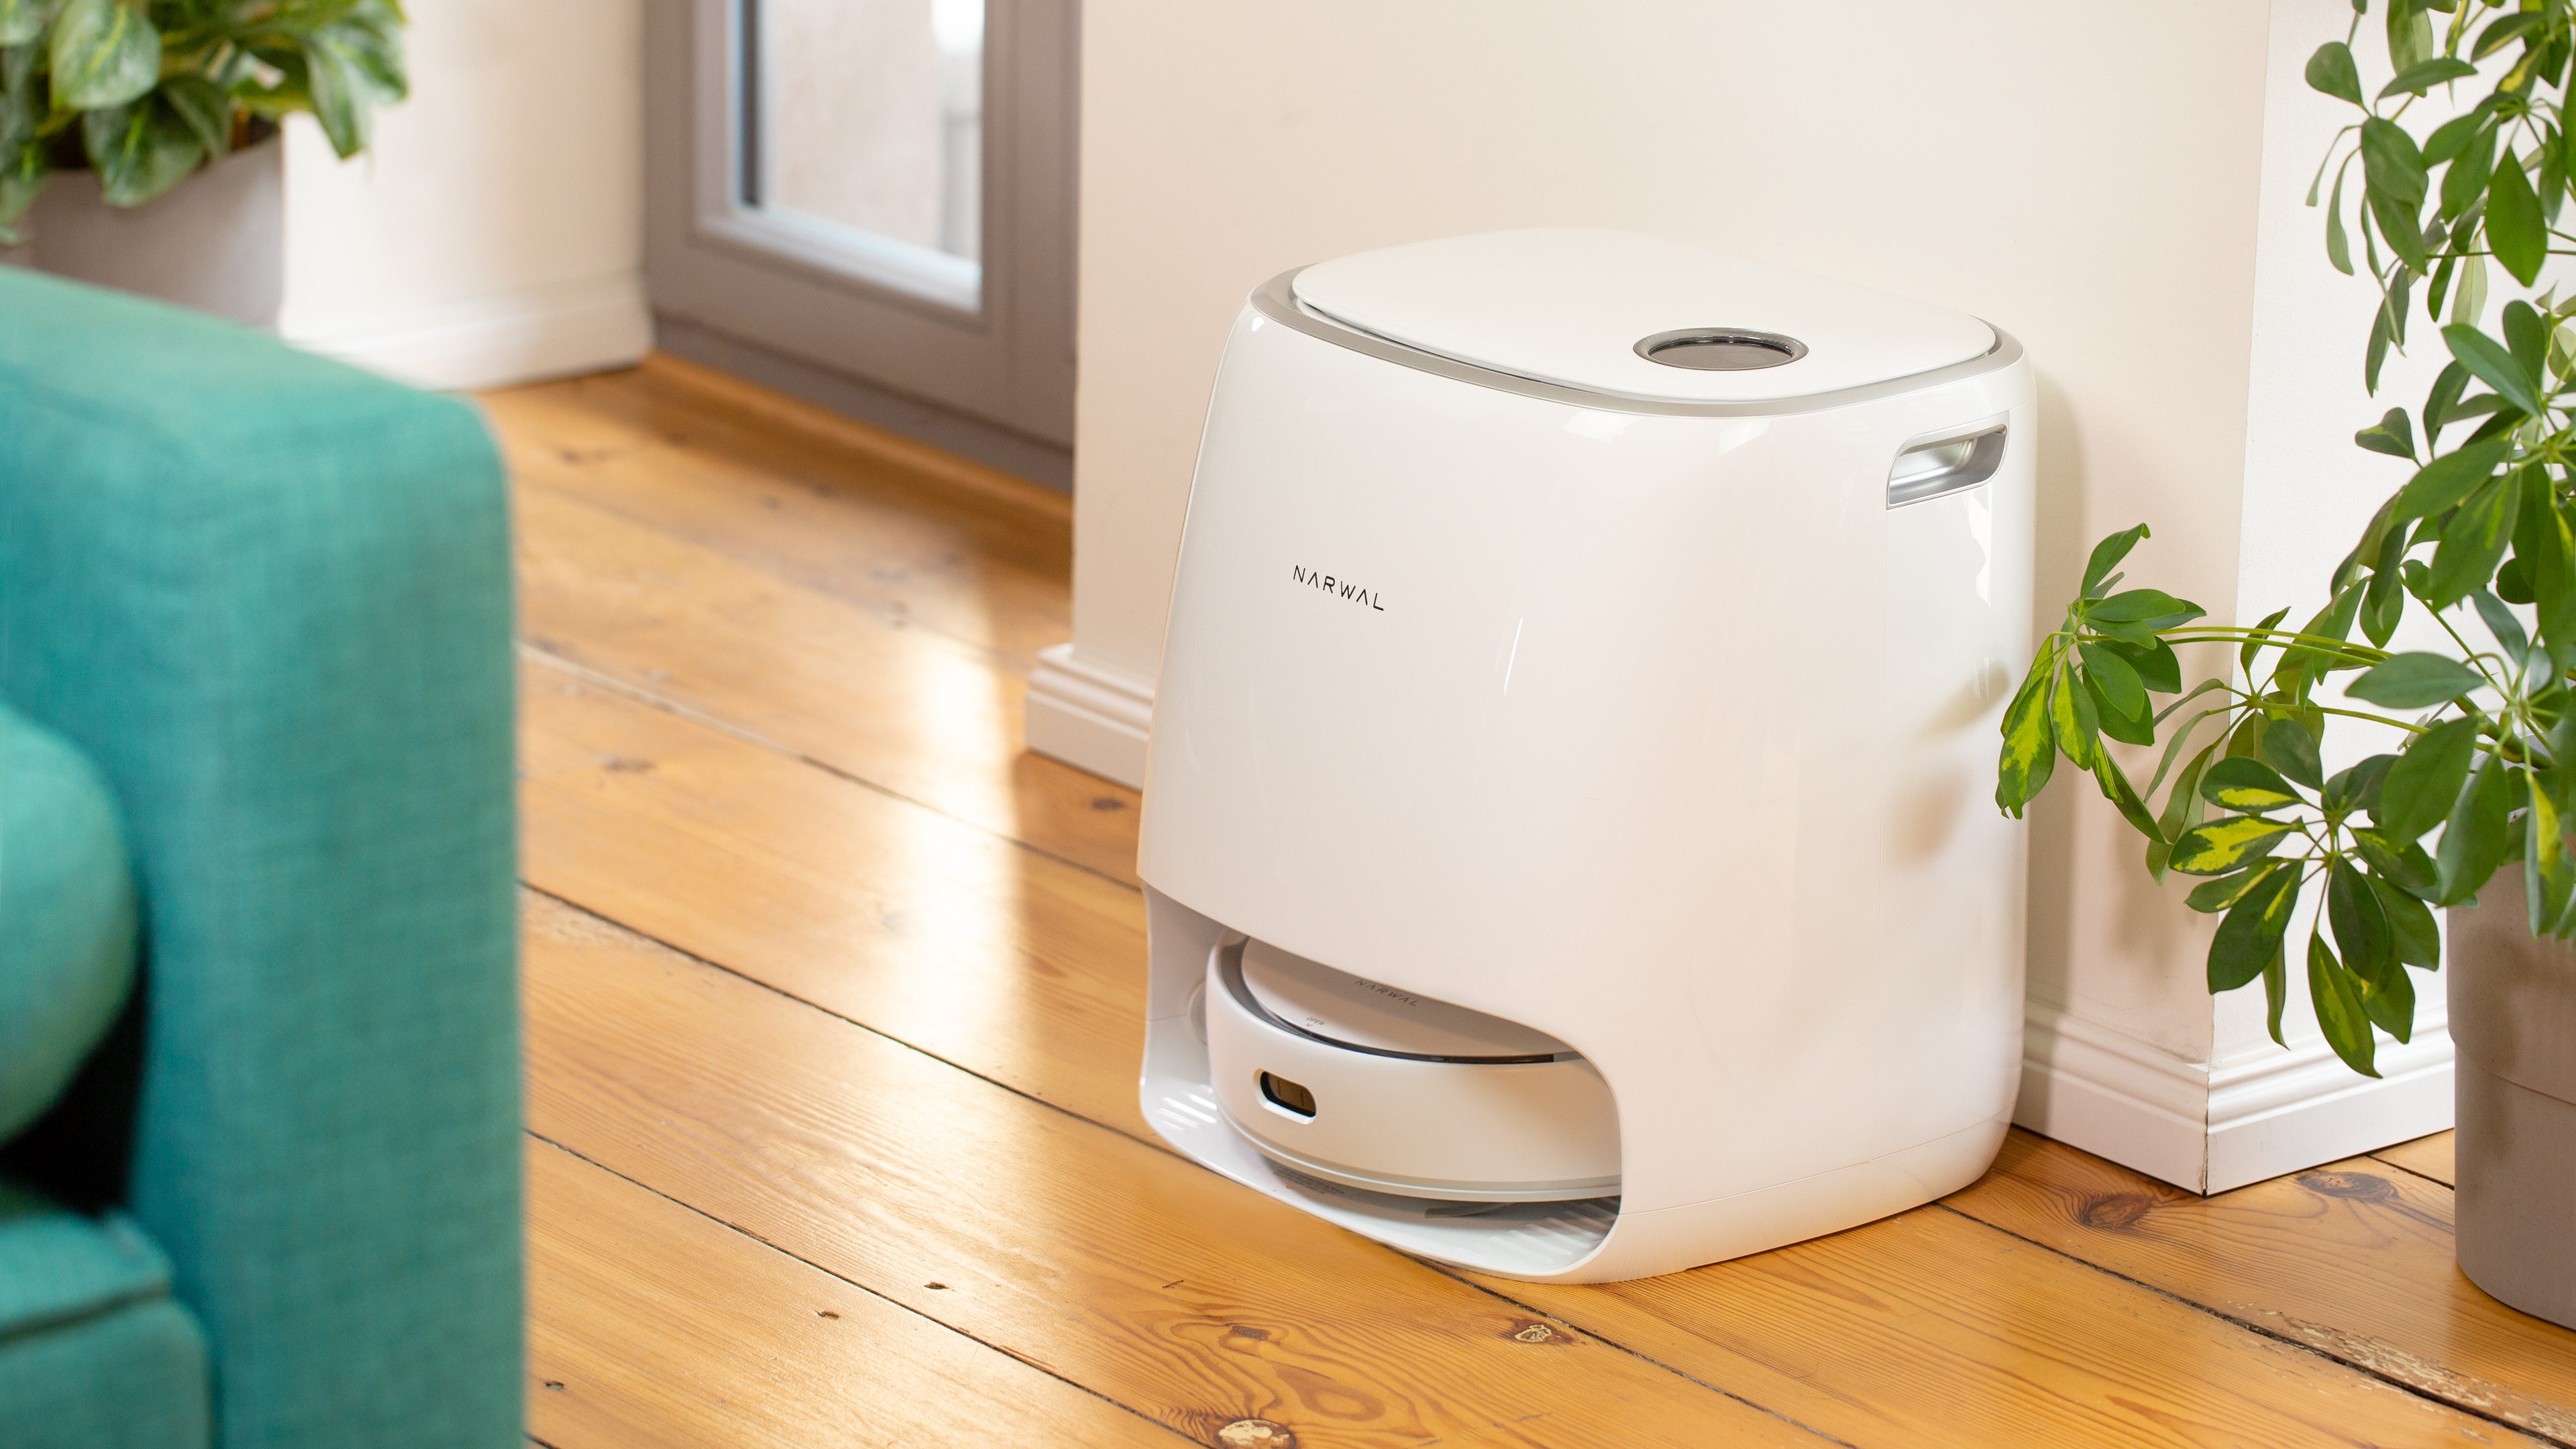 Narwal Freo Review - Is It The Best Combined Vacuum And Mop Robot Cleaner?